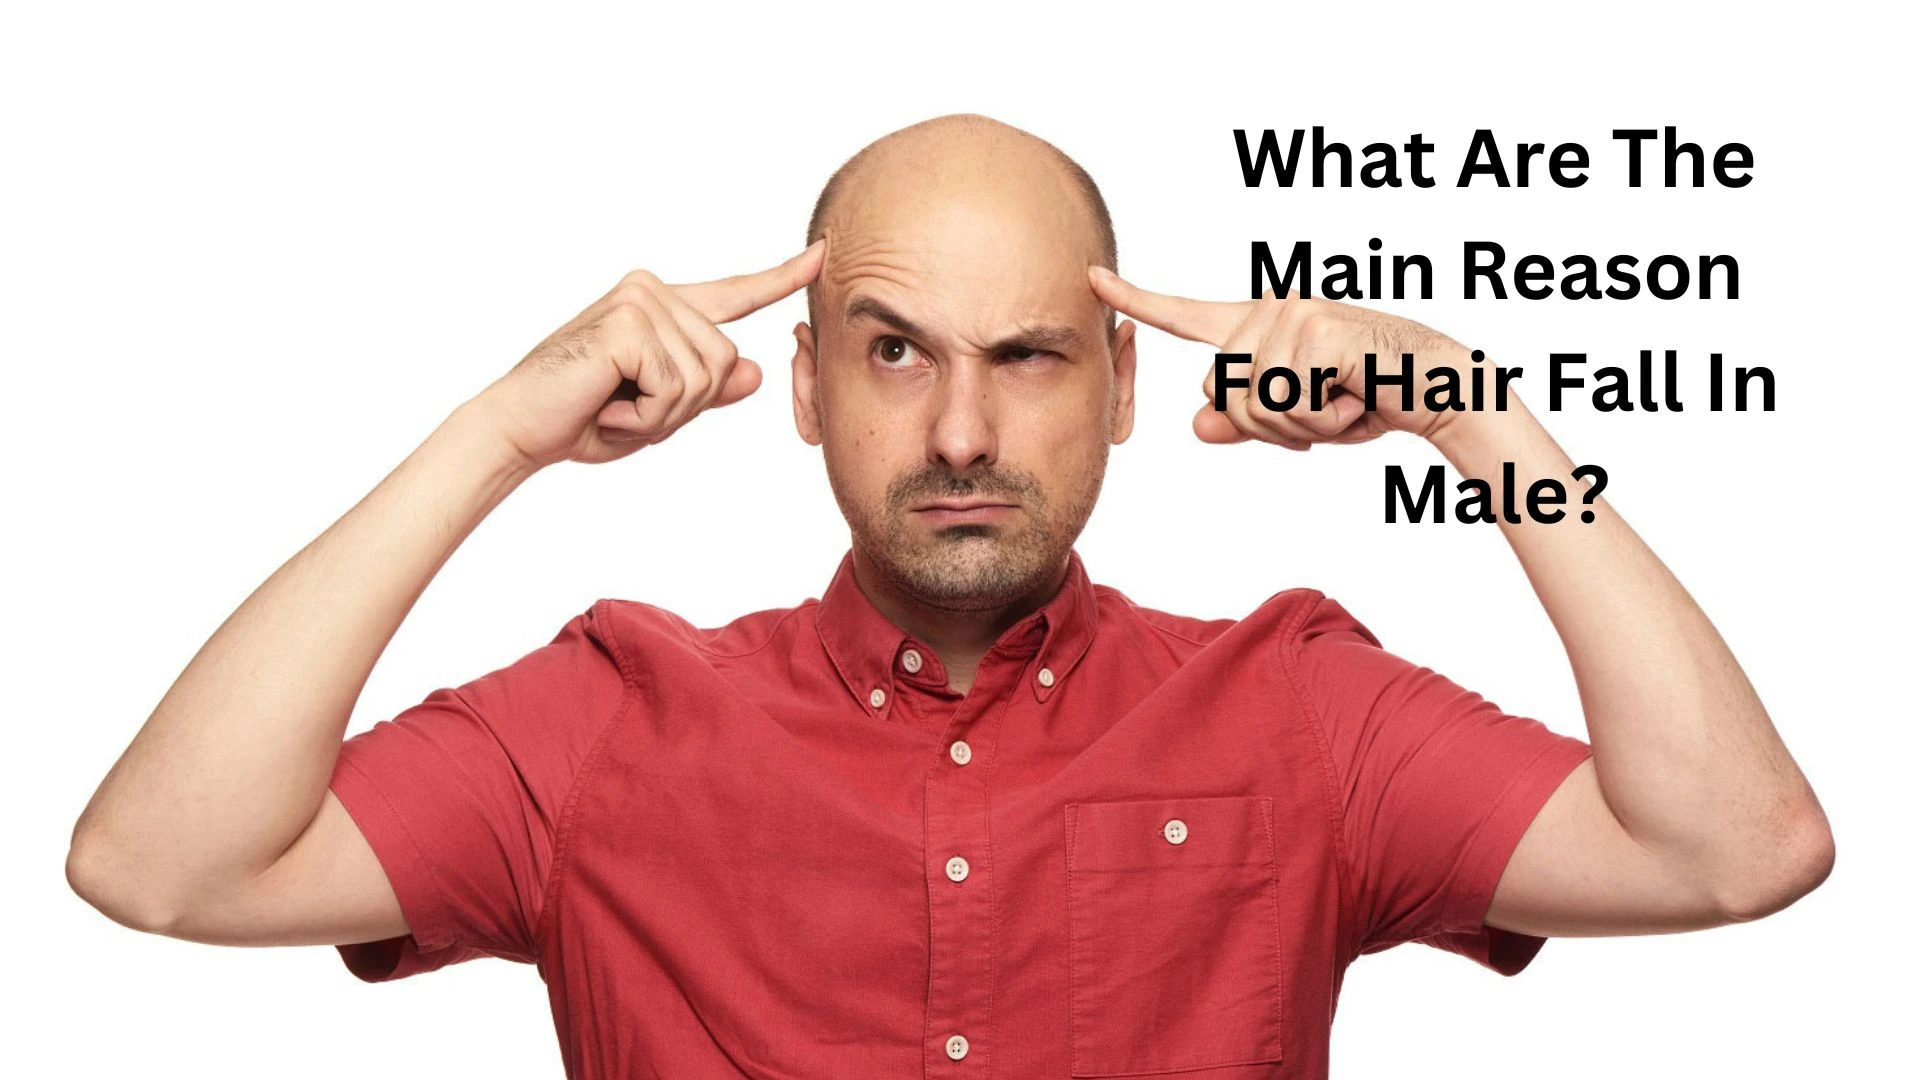 What Are The Main Reason For Hair Fall